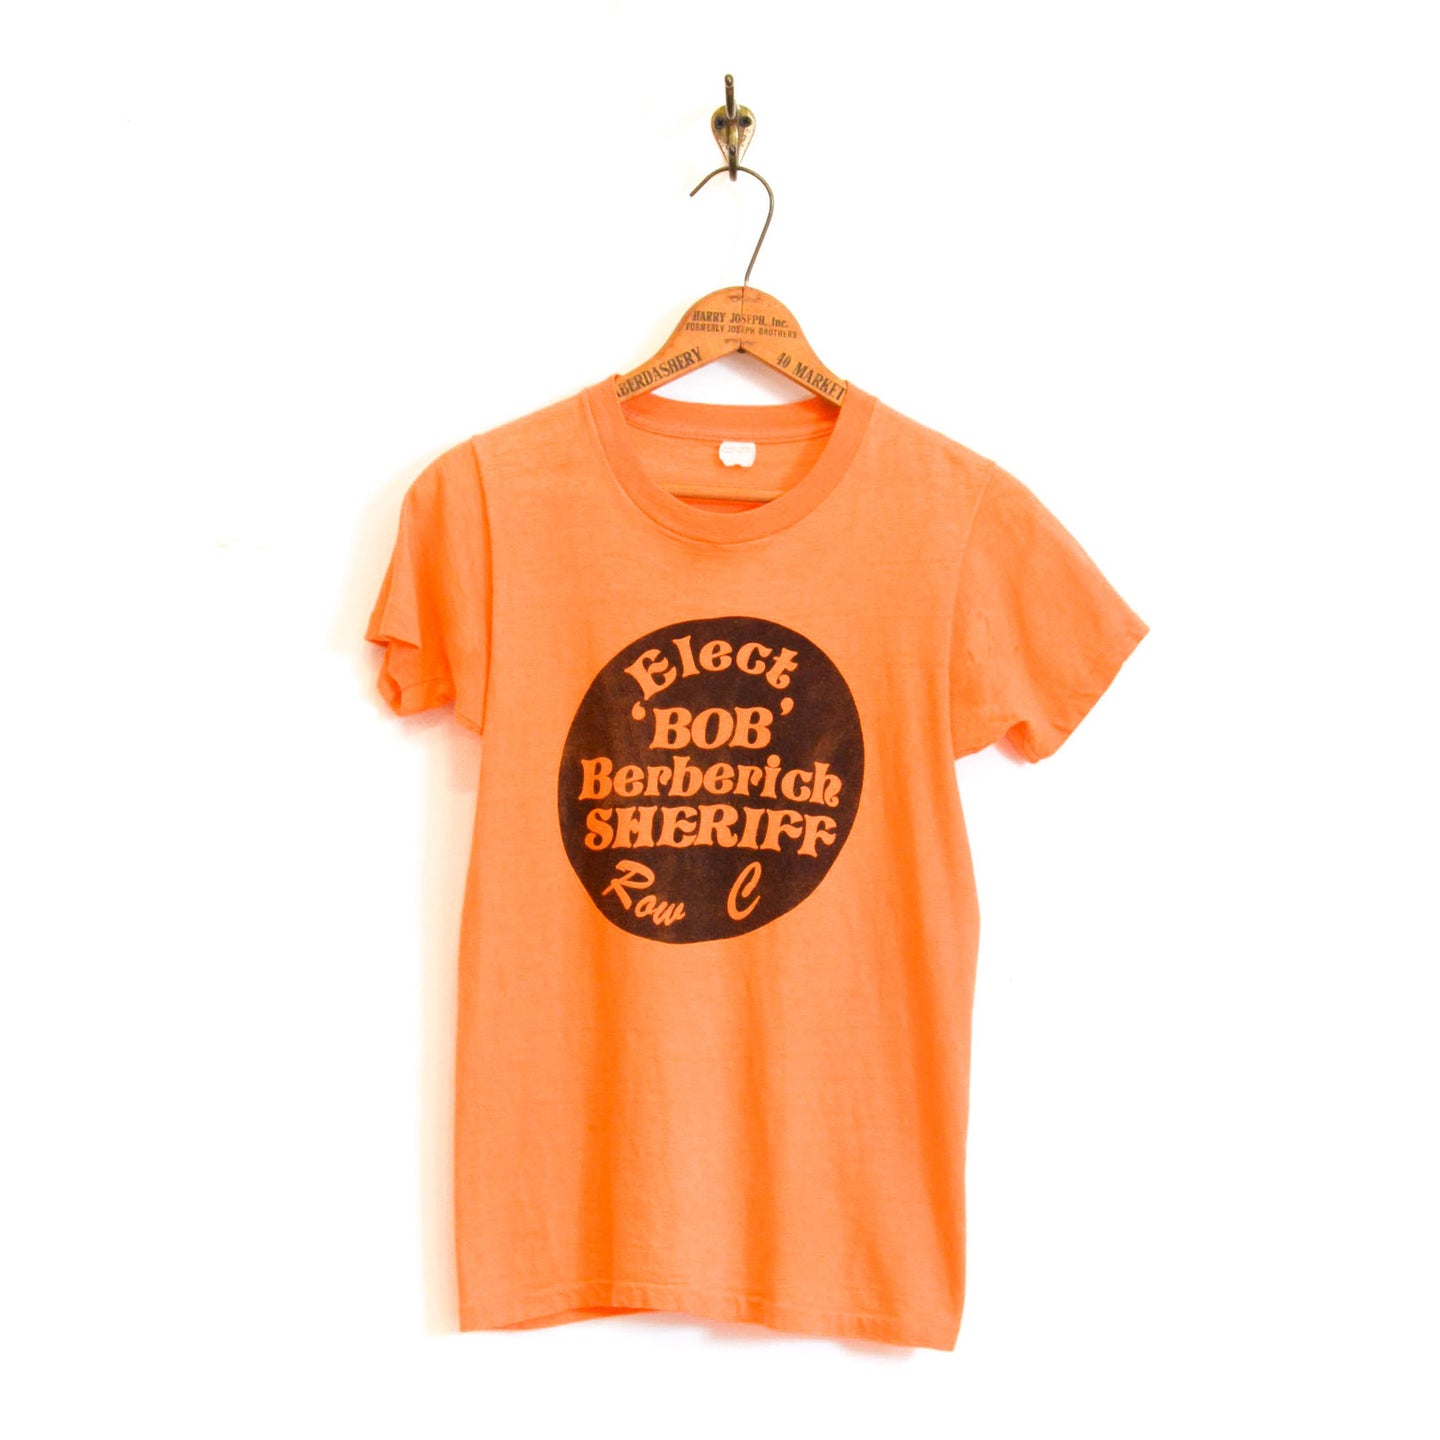 Fruits of the Loom - Local Campaign Tee Shirt